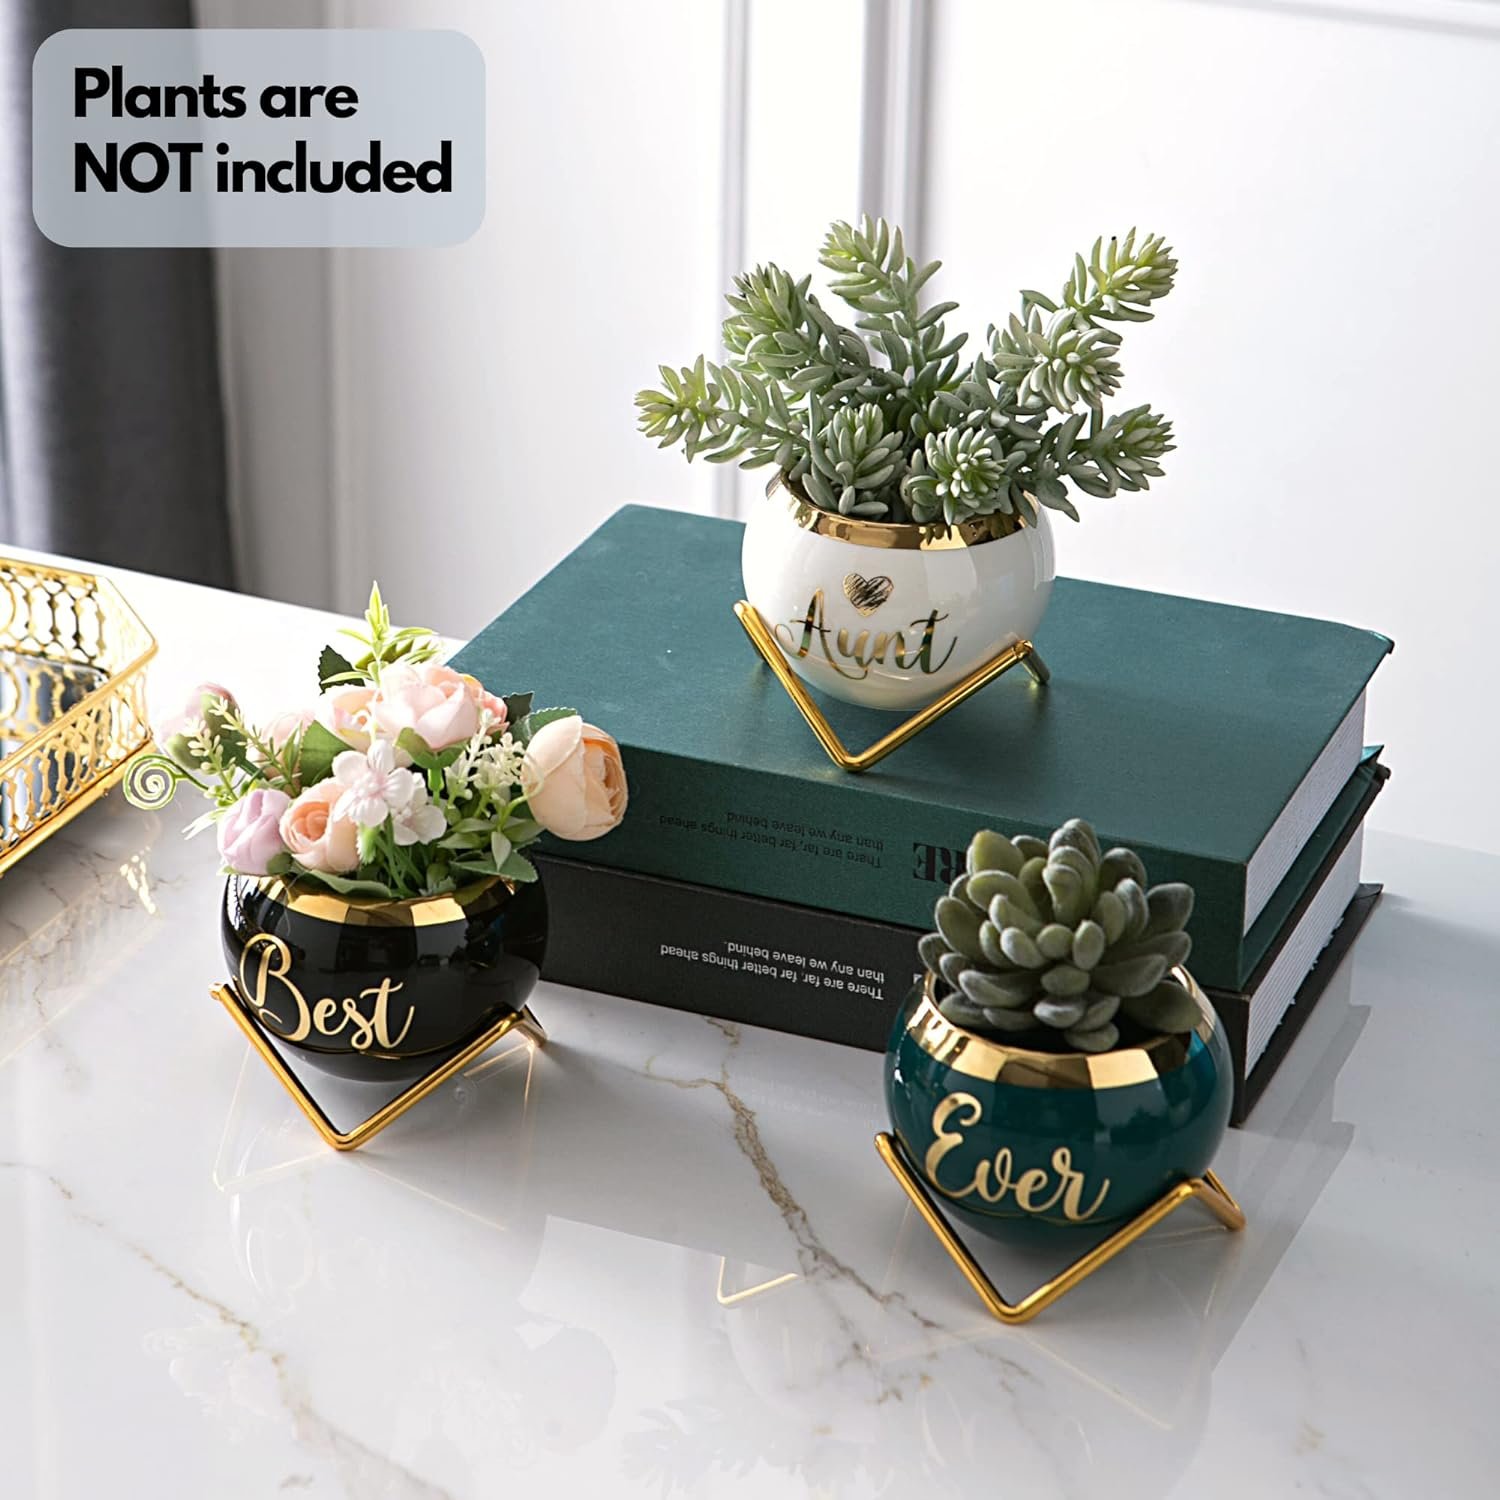 Best Friend Birthday Gifts for Women Unique | Gifts for Best Friends Women | Best Friend Birthday Gifts for Women | Birthday Gifts for Best Friend | Cute Sister Gifts from Sister,3 Pcs Succulent Pots